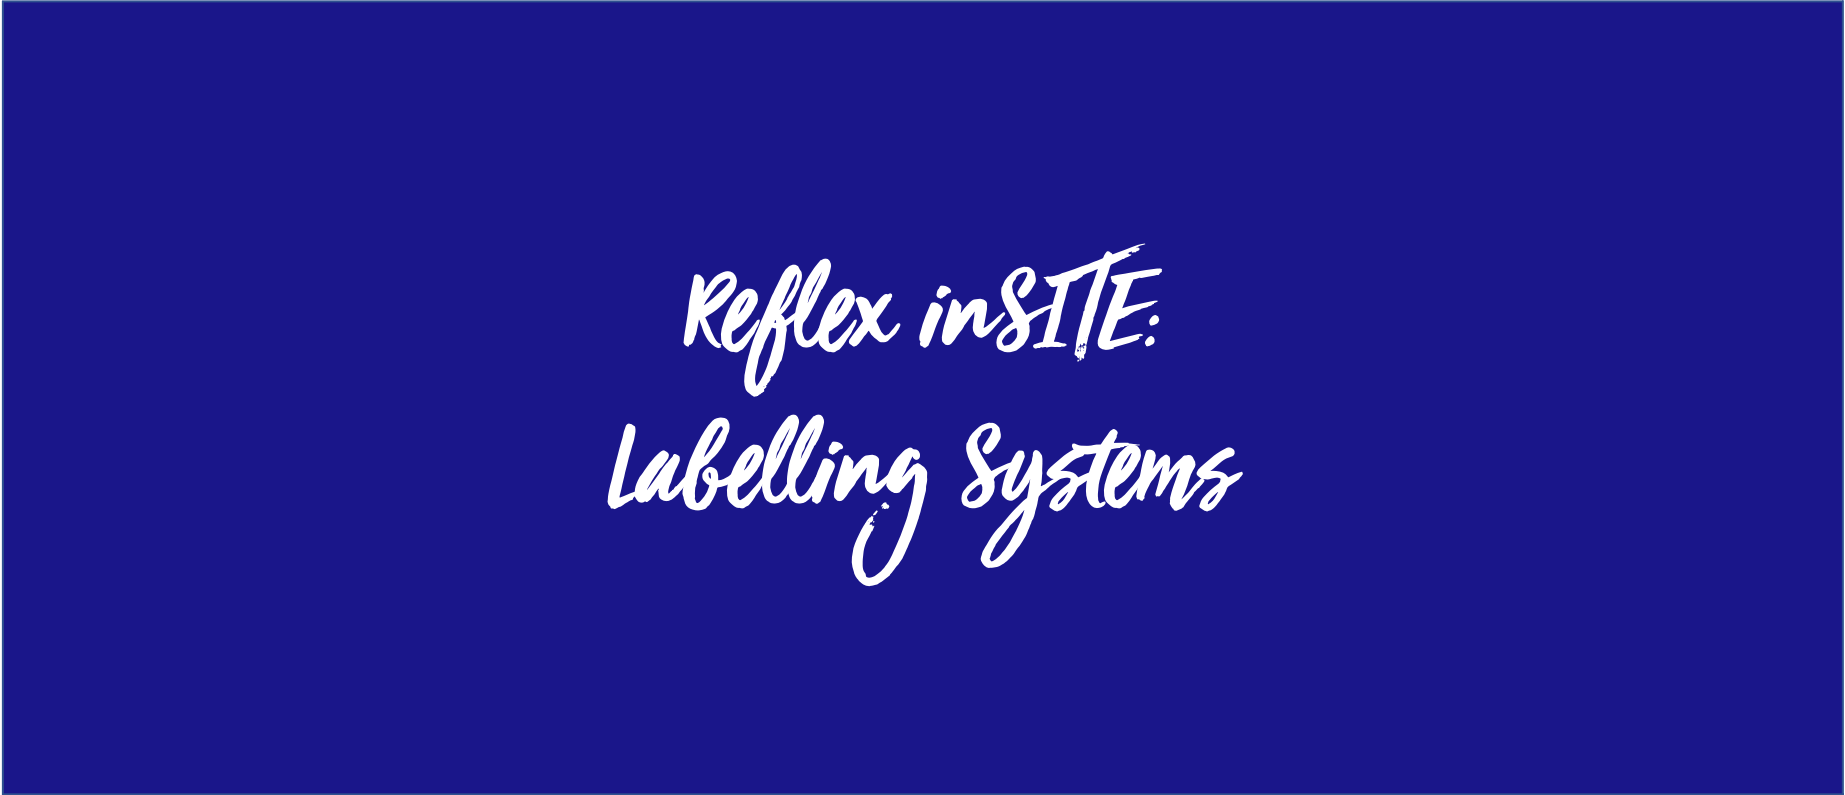 Reflex inSITE: Labelling Systems